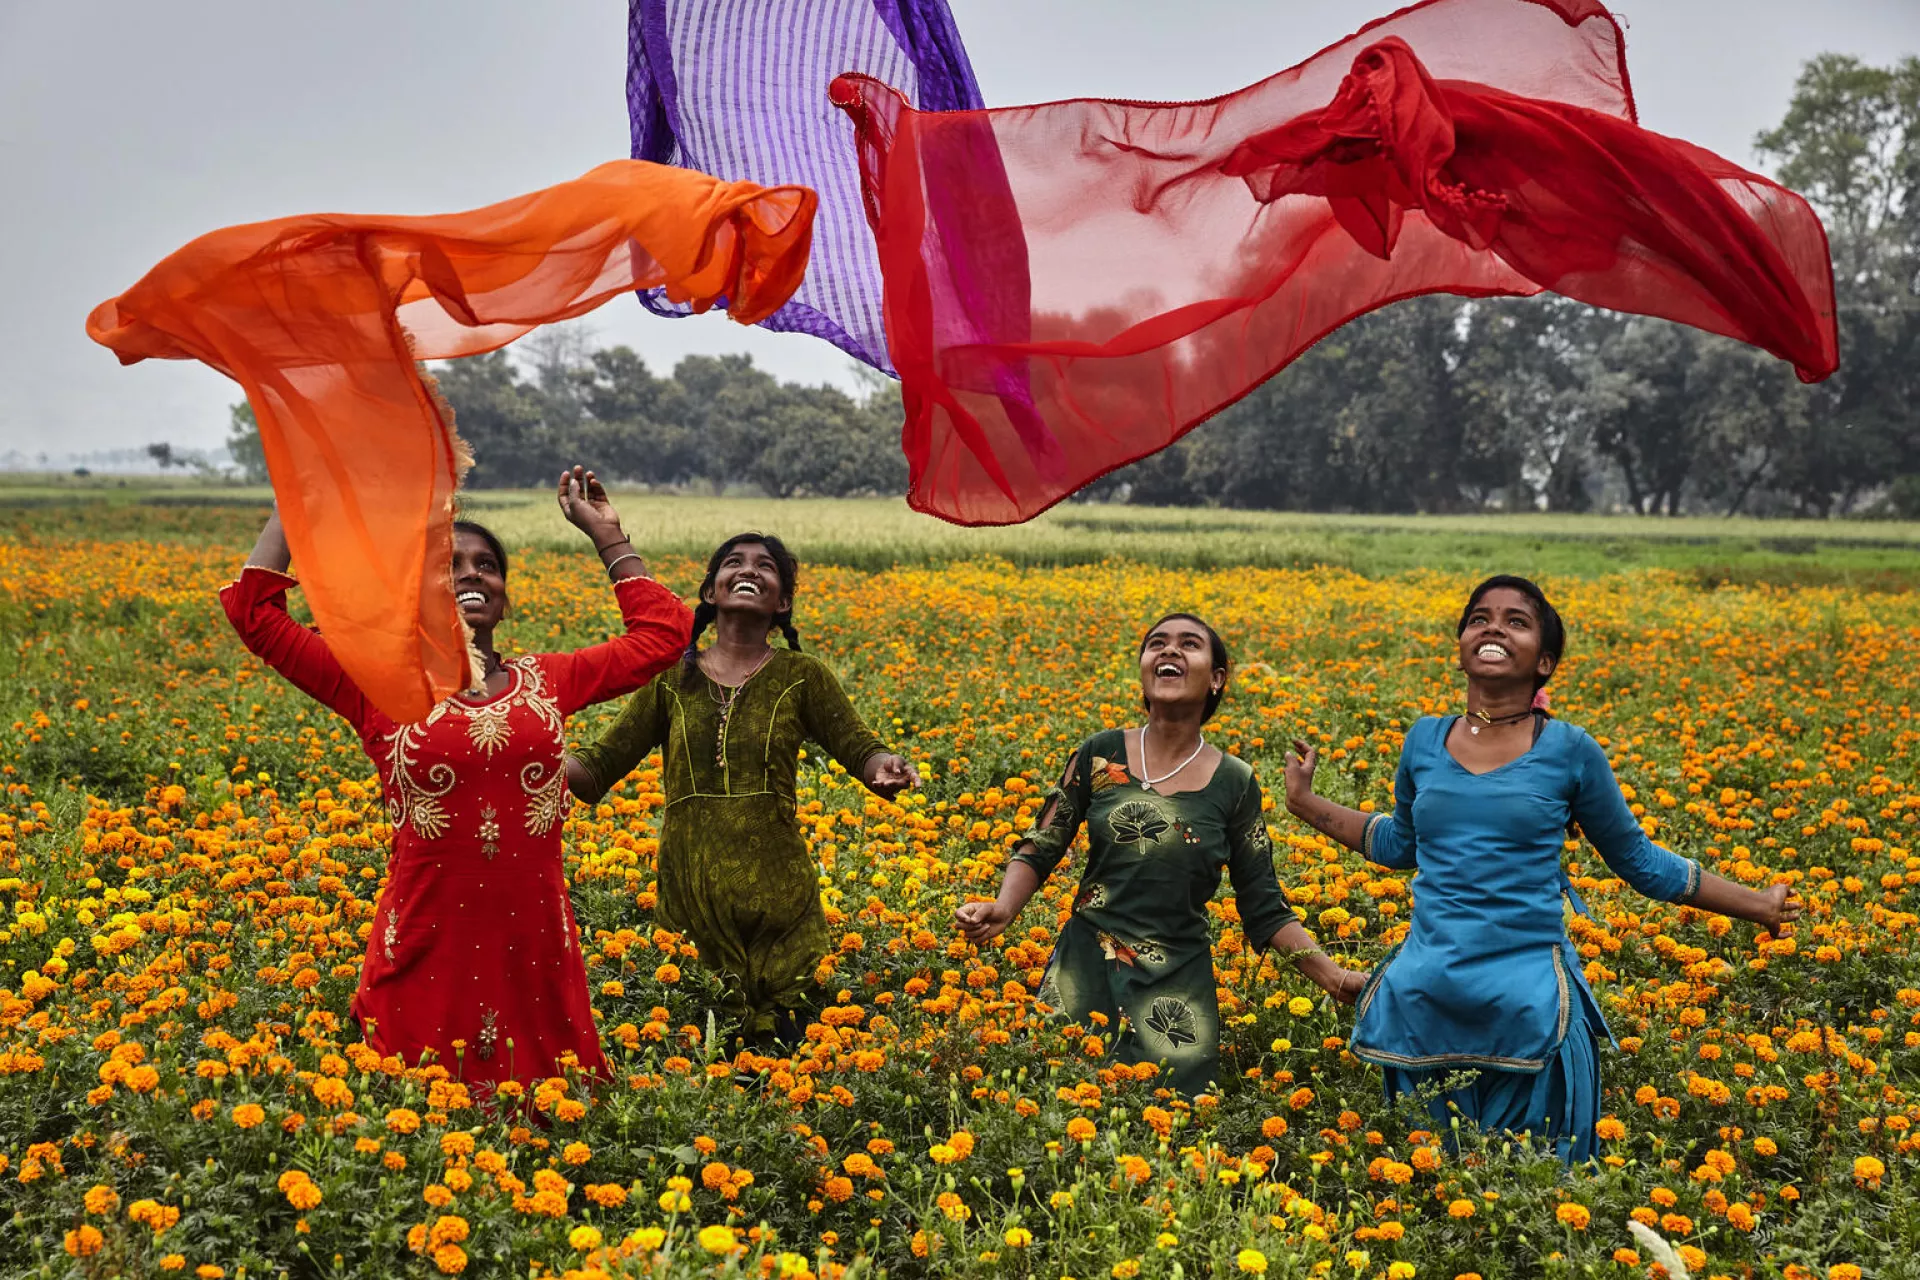 A group of adolescent girls wearing brightly coloured saris in India playing in a field of yellow flowers